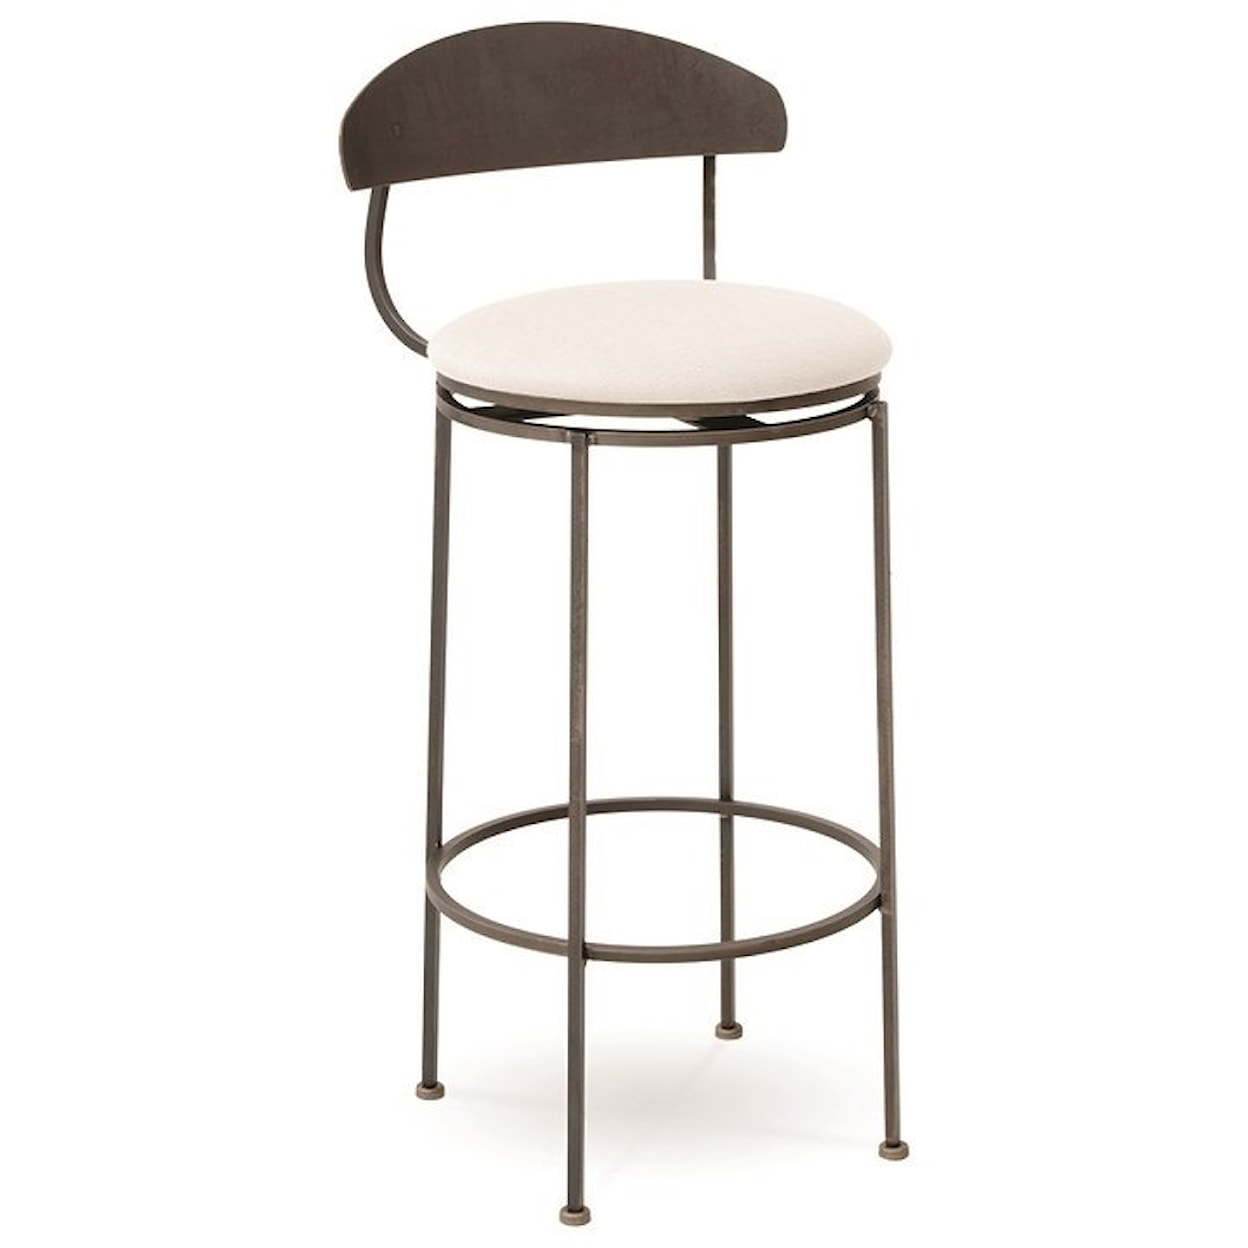 Charleston Forge Dining Room Accents Echo Swivel Counterstool 26"